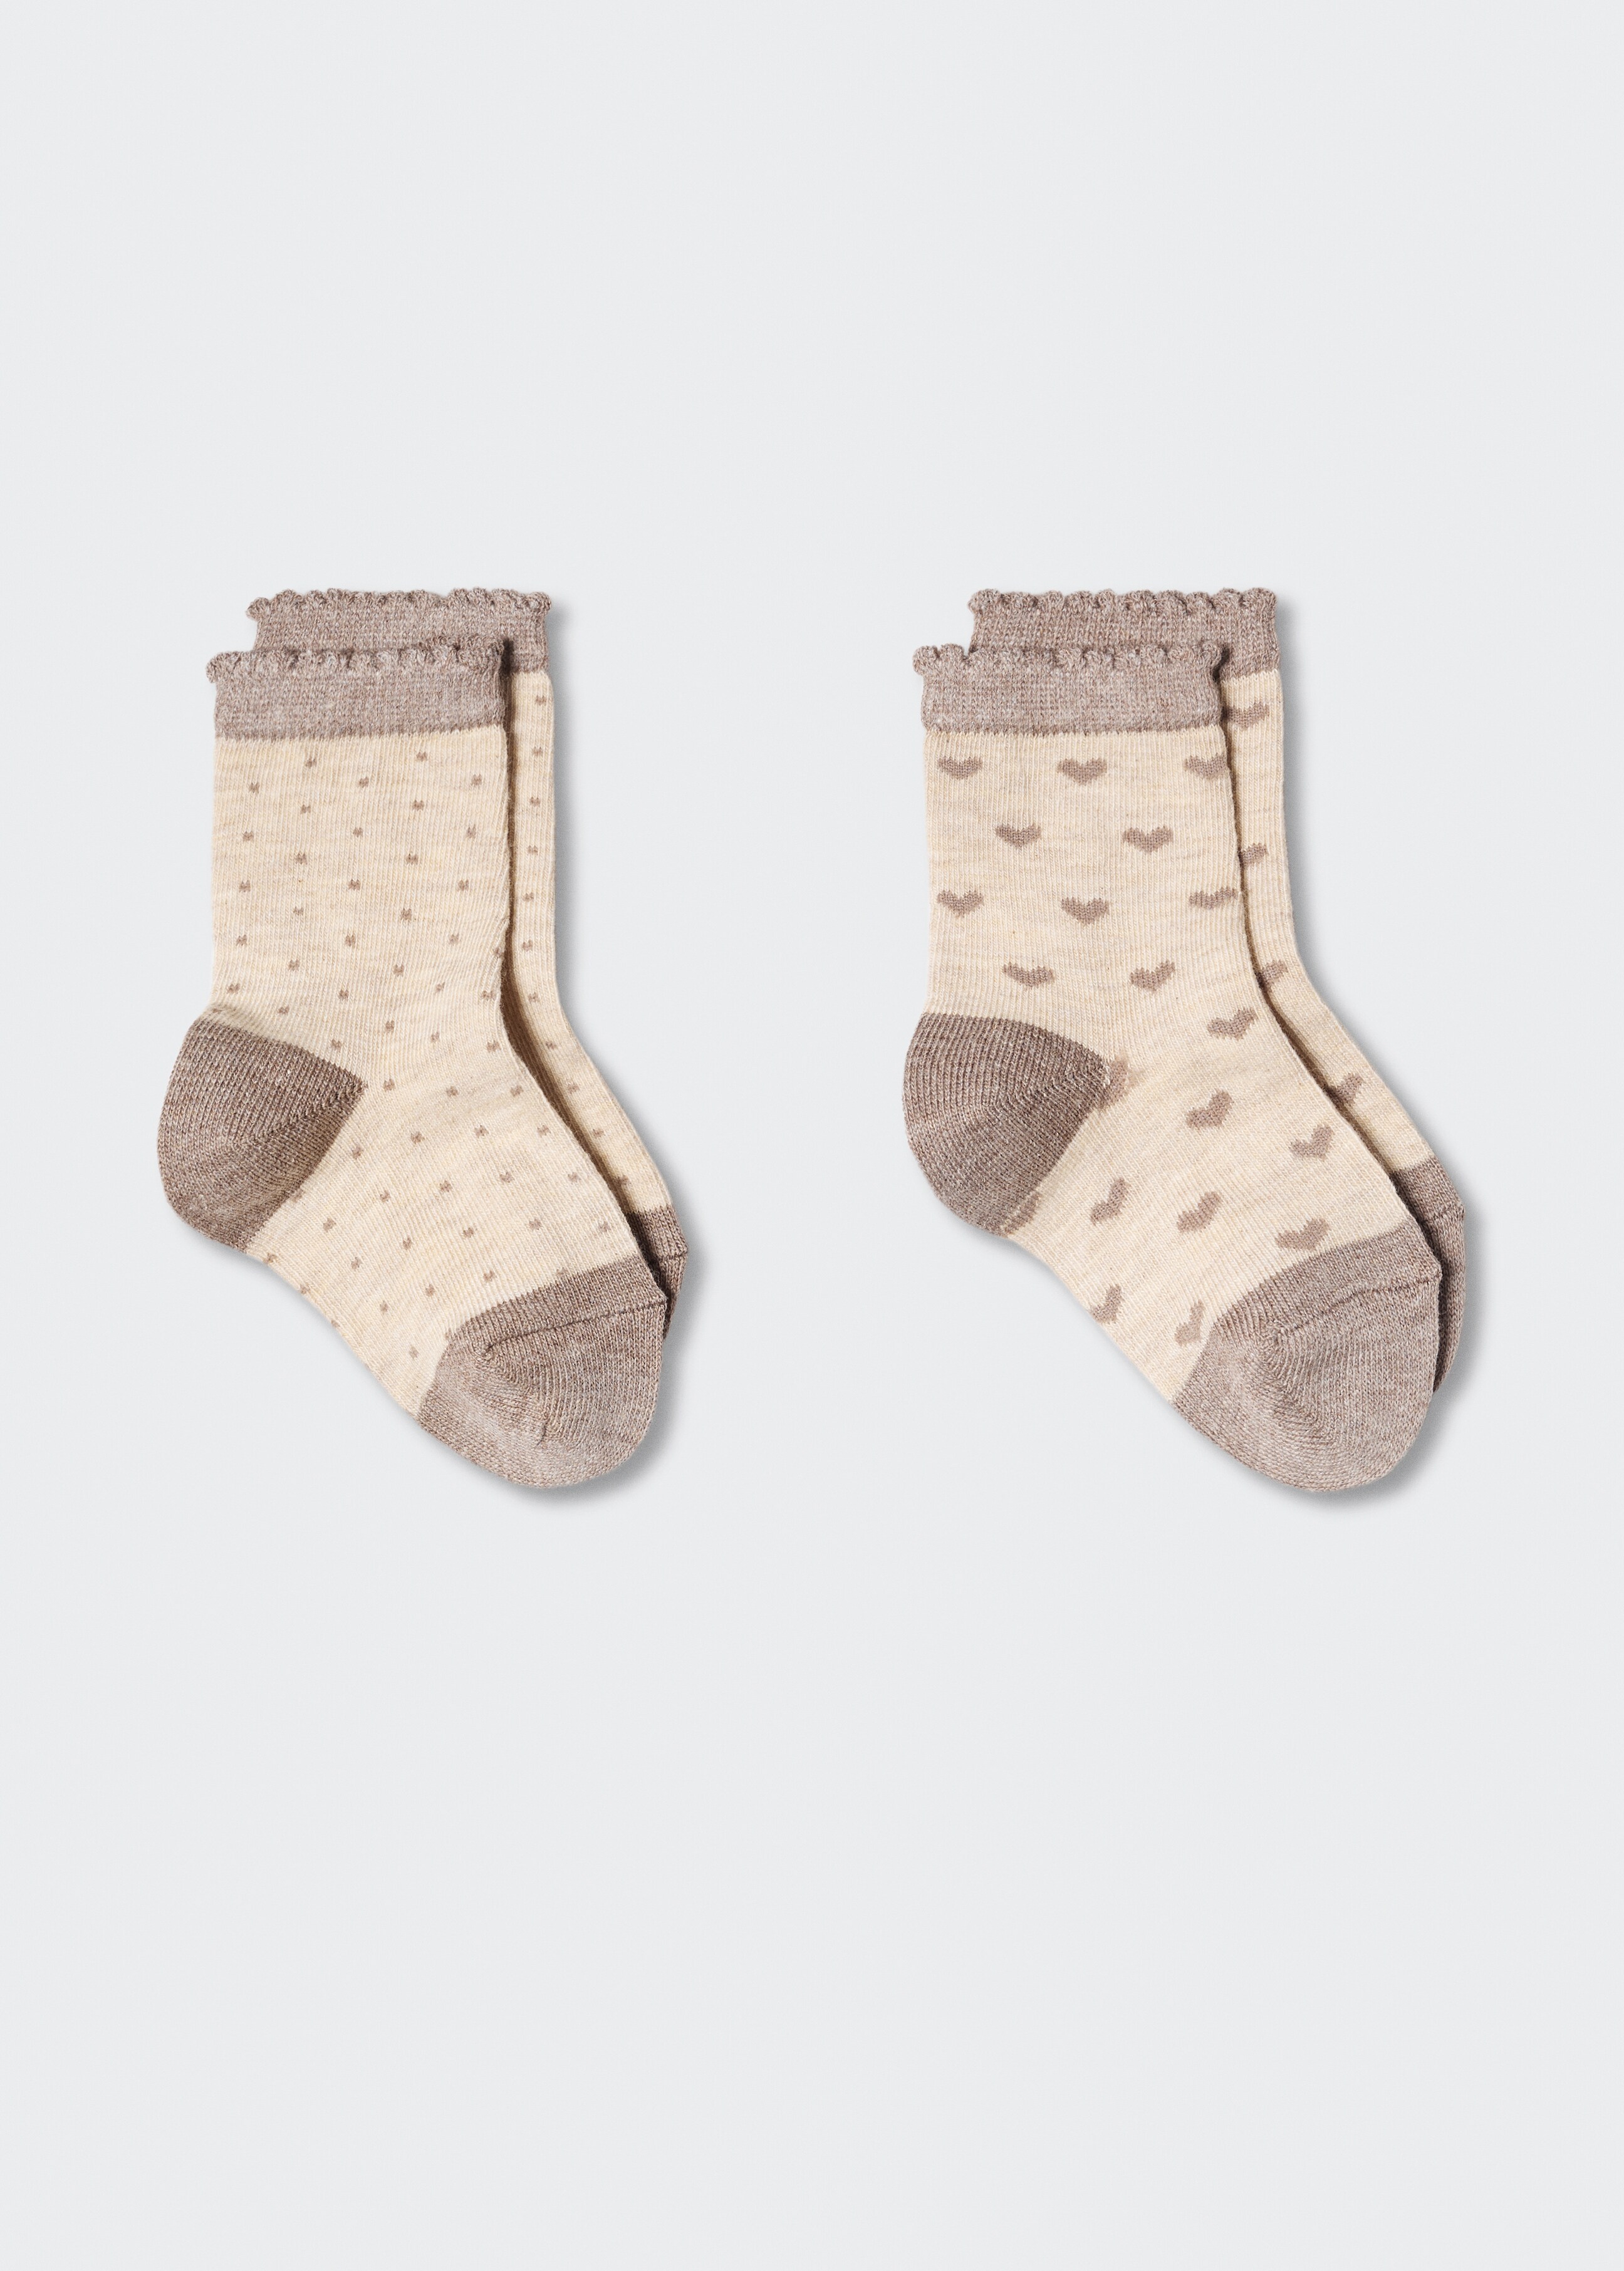 Printed cotton socks - Article without model